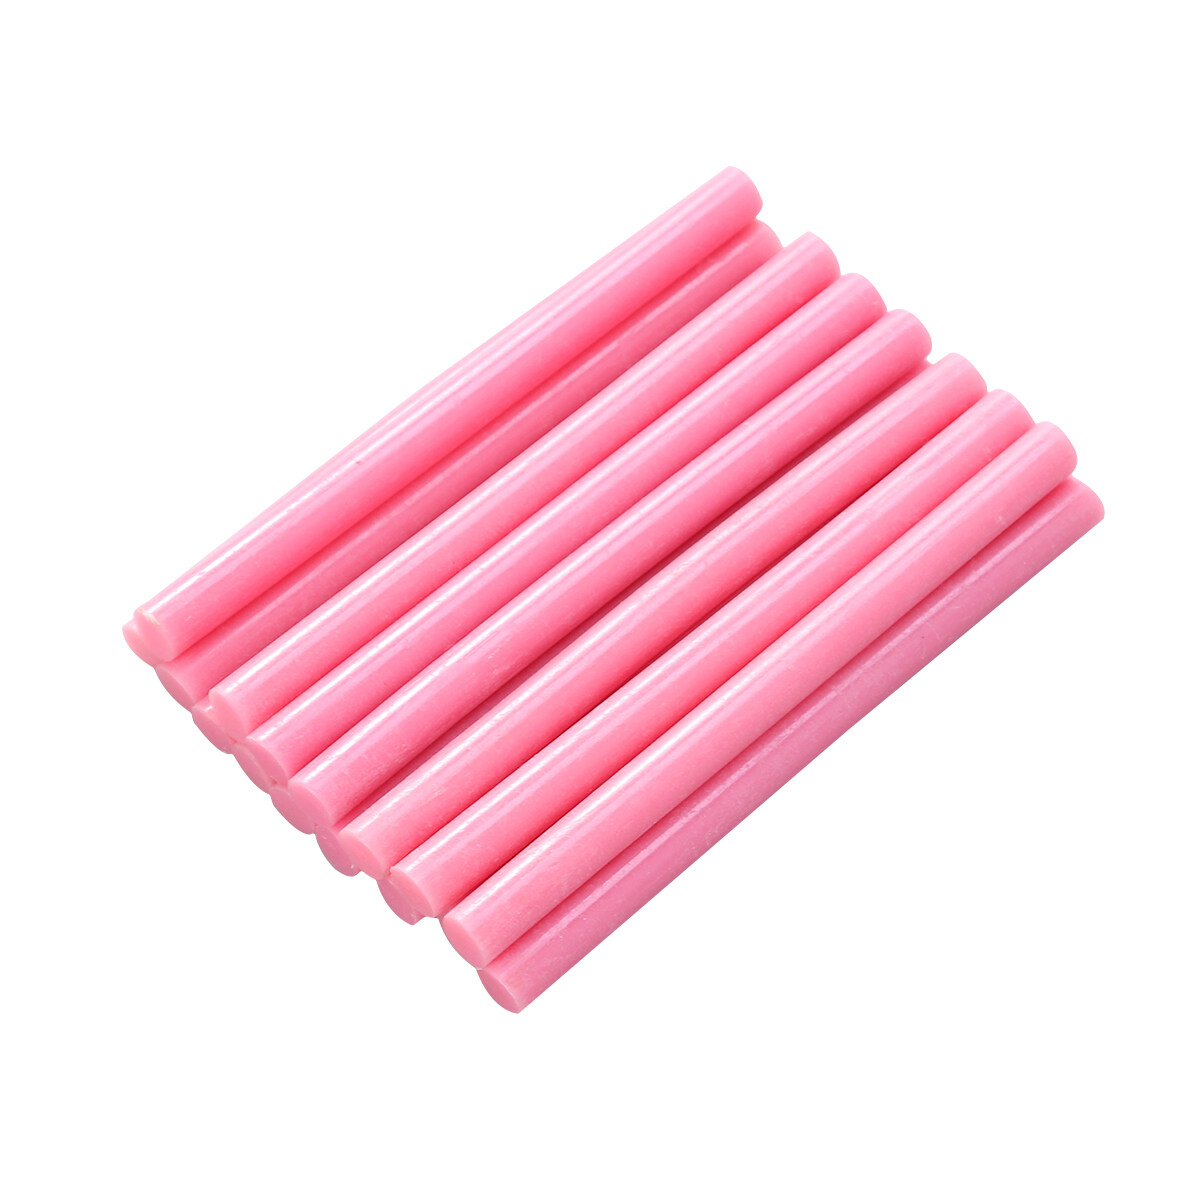 16Pc Colorful Hot Melt Glue Sticks for Hot Glue Multifunctional Repair Tool  (Pink) 